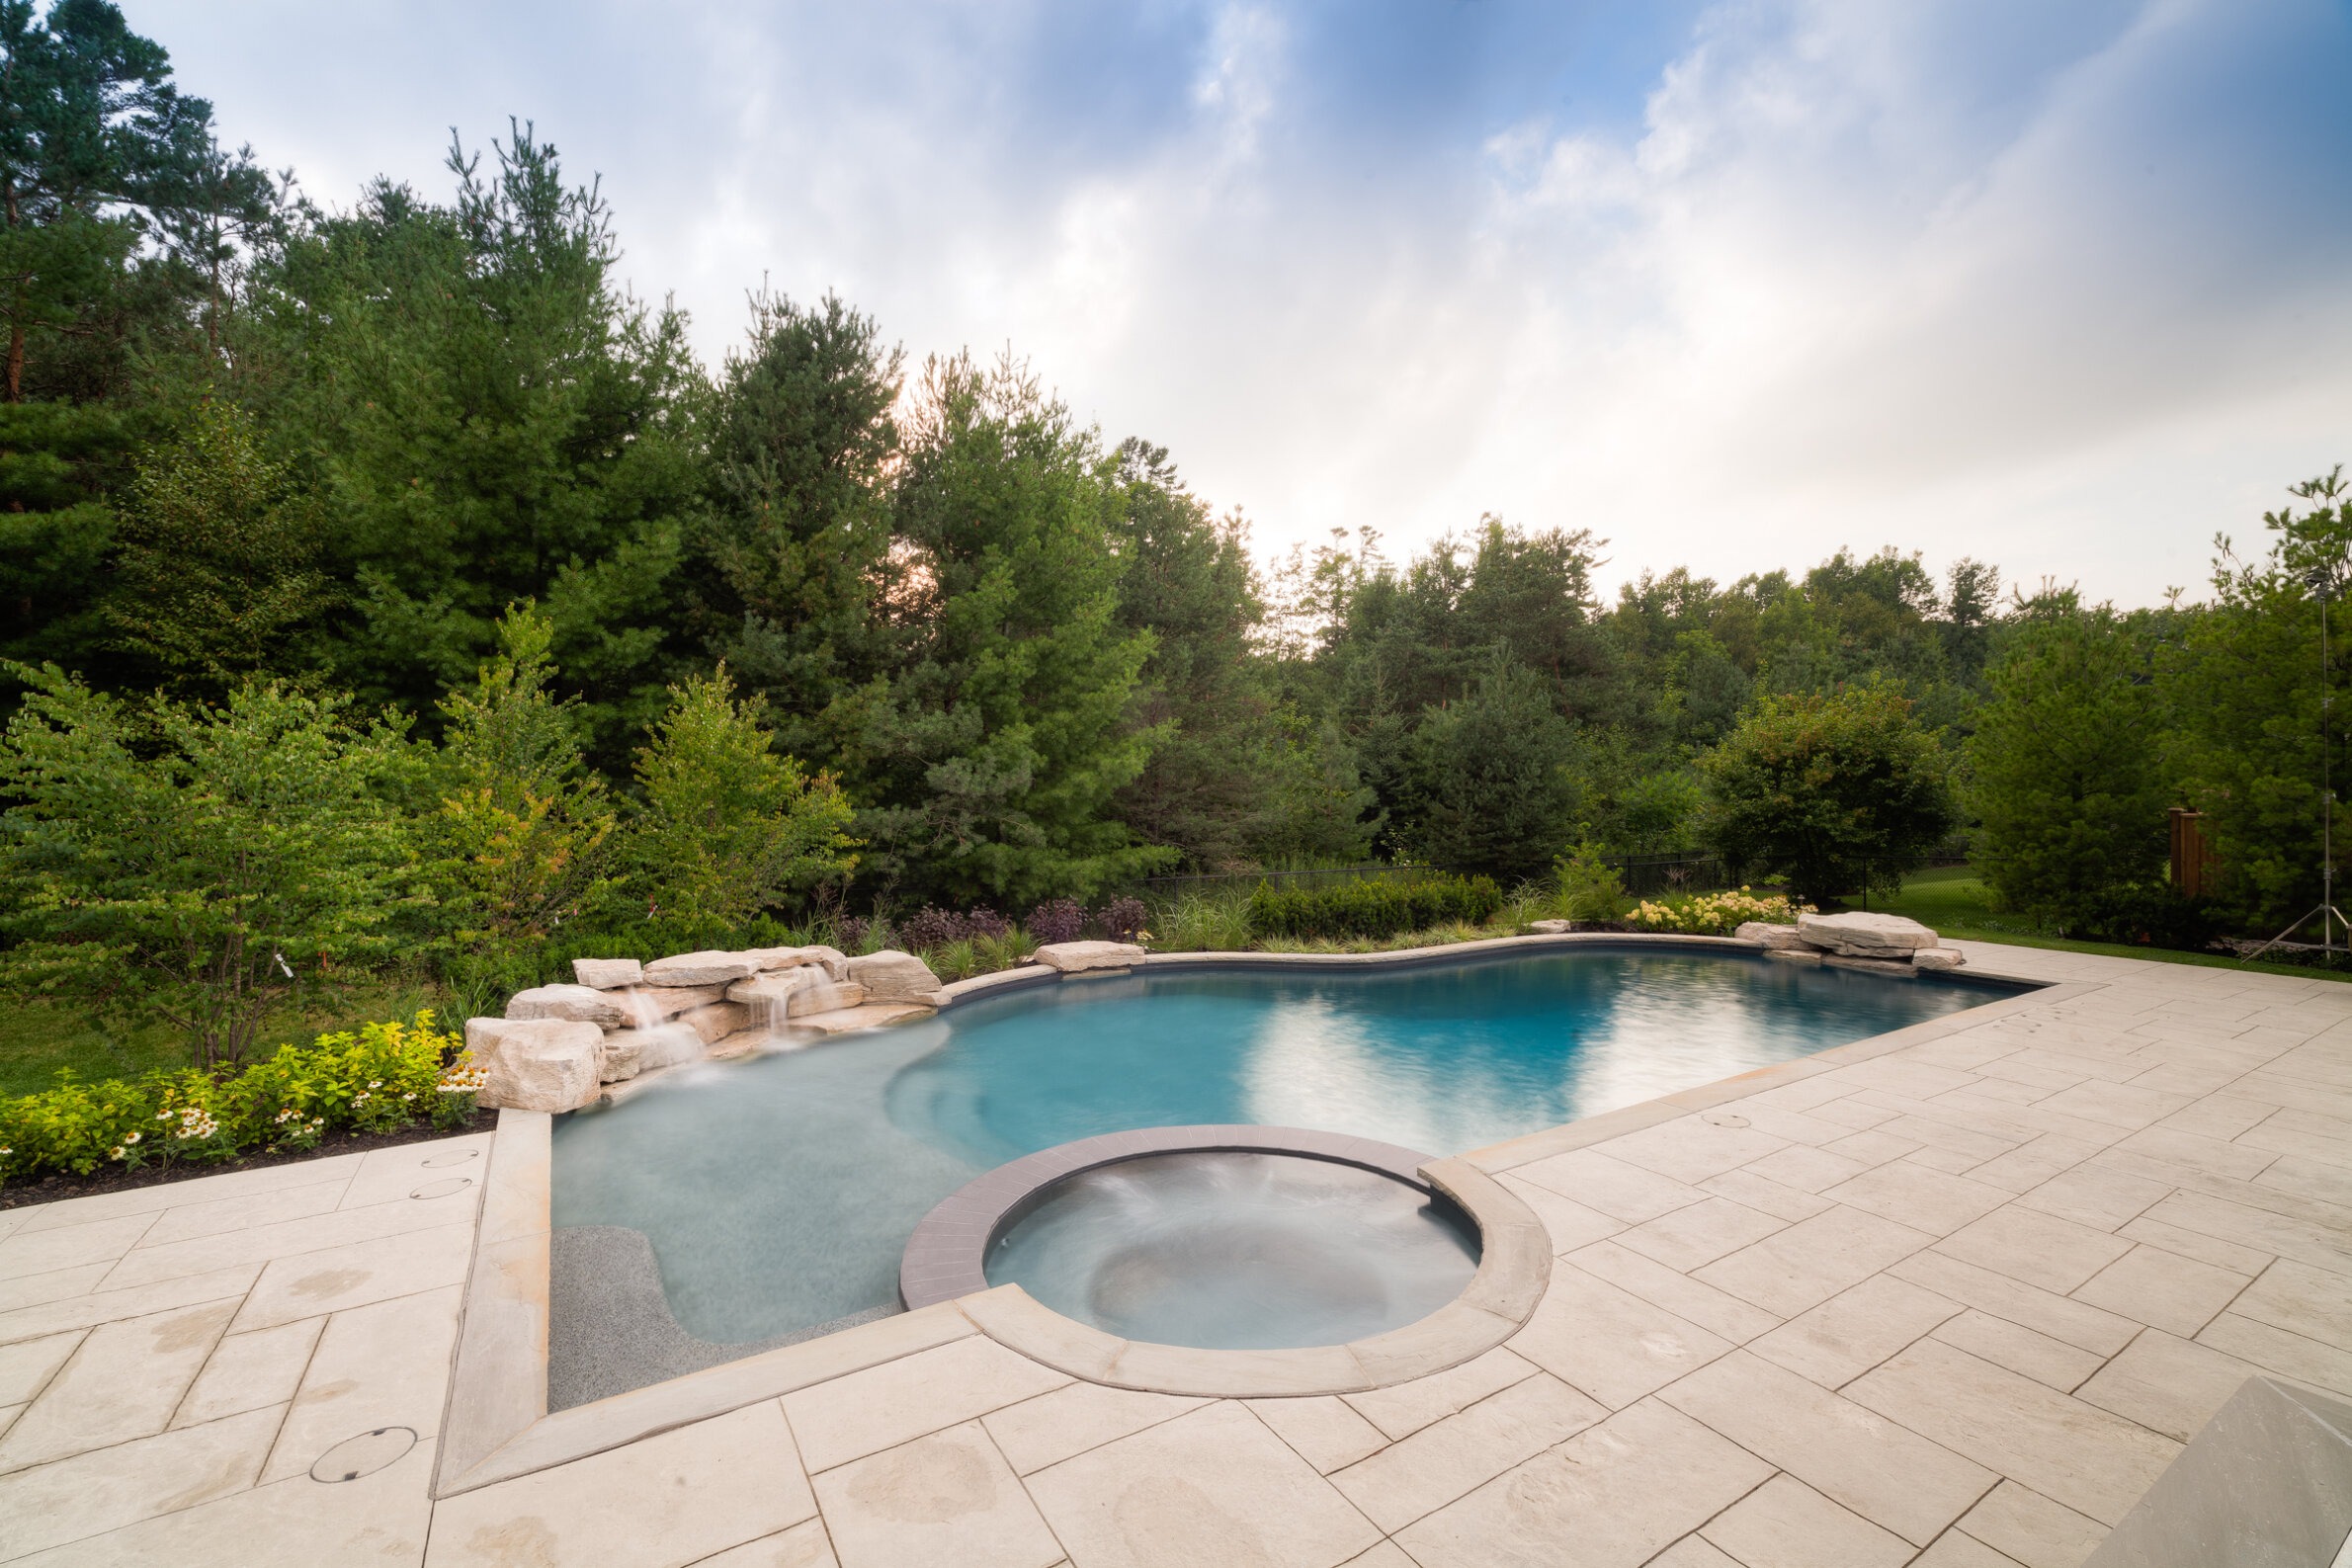 The image shows a backyard with a curvy swimming pool and a hot tub, surrounded by a stone patio and lush green trees under a cloudy sky.